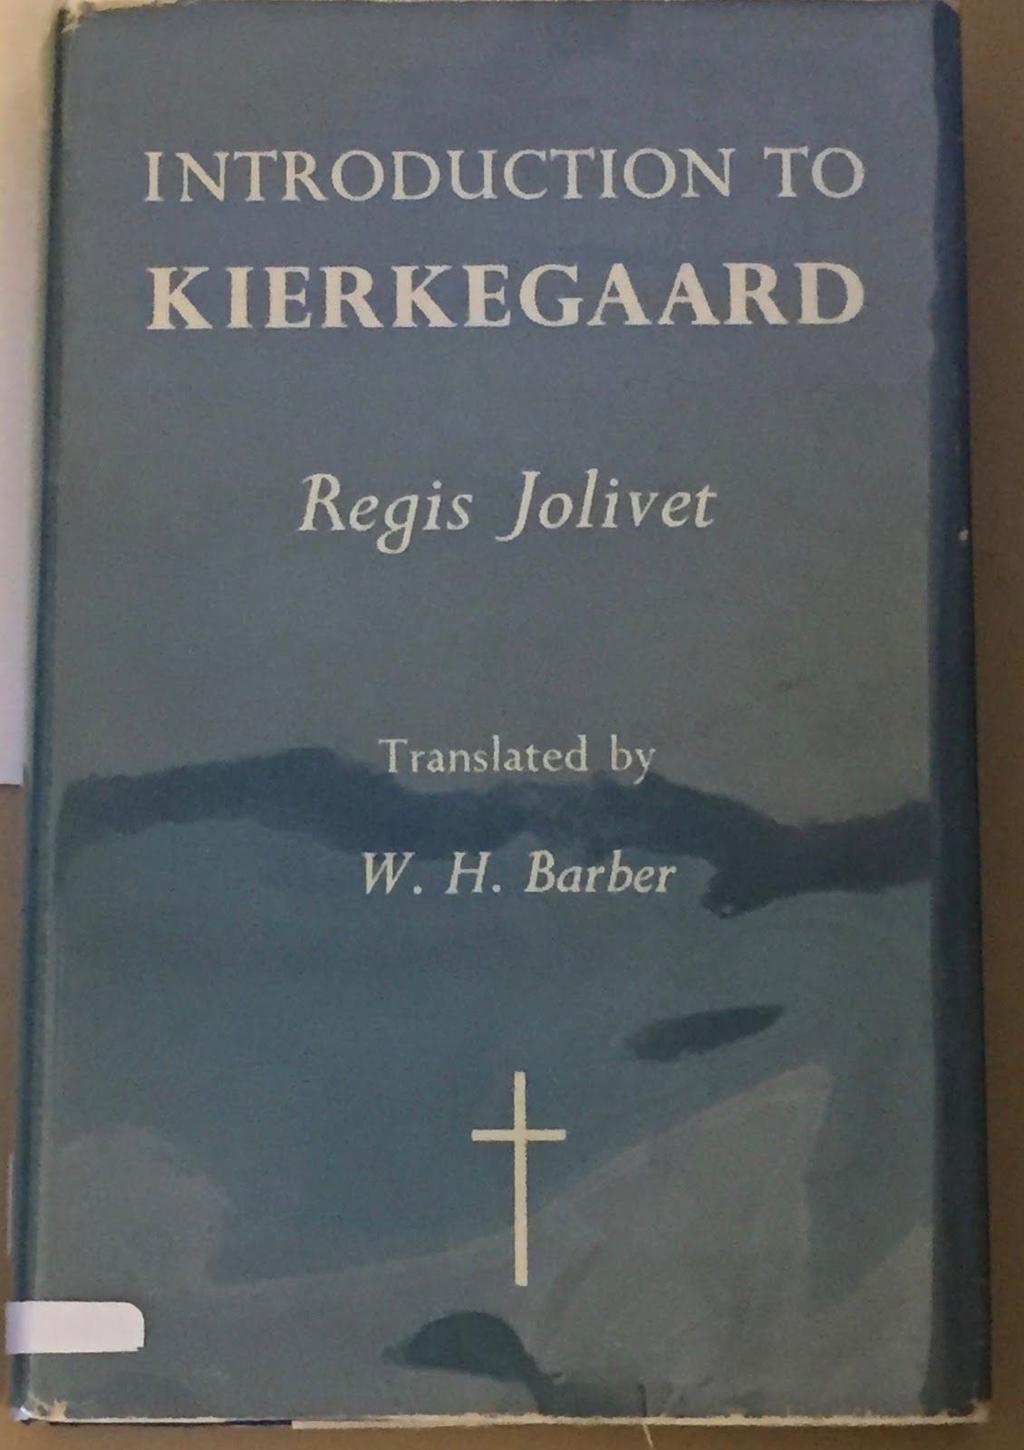 Introduction to Kierkegaard by Régis Jolivet Kierkegaard stands out today as one of the greatest among thinkers who have had the noble ambition to be the apostles of Christian truth.